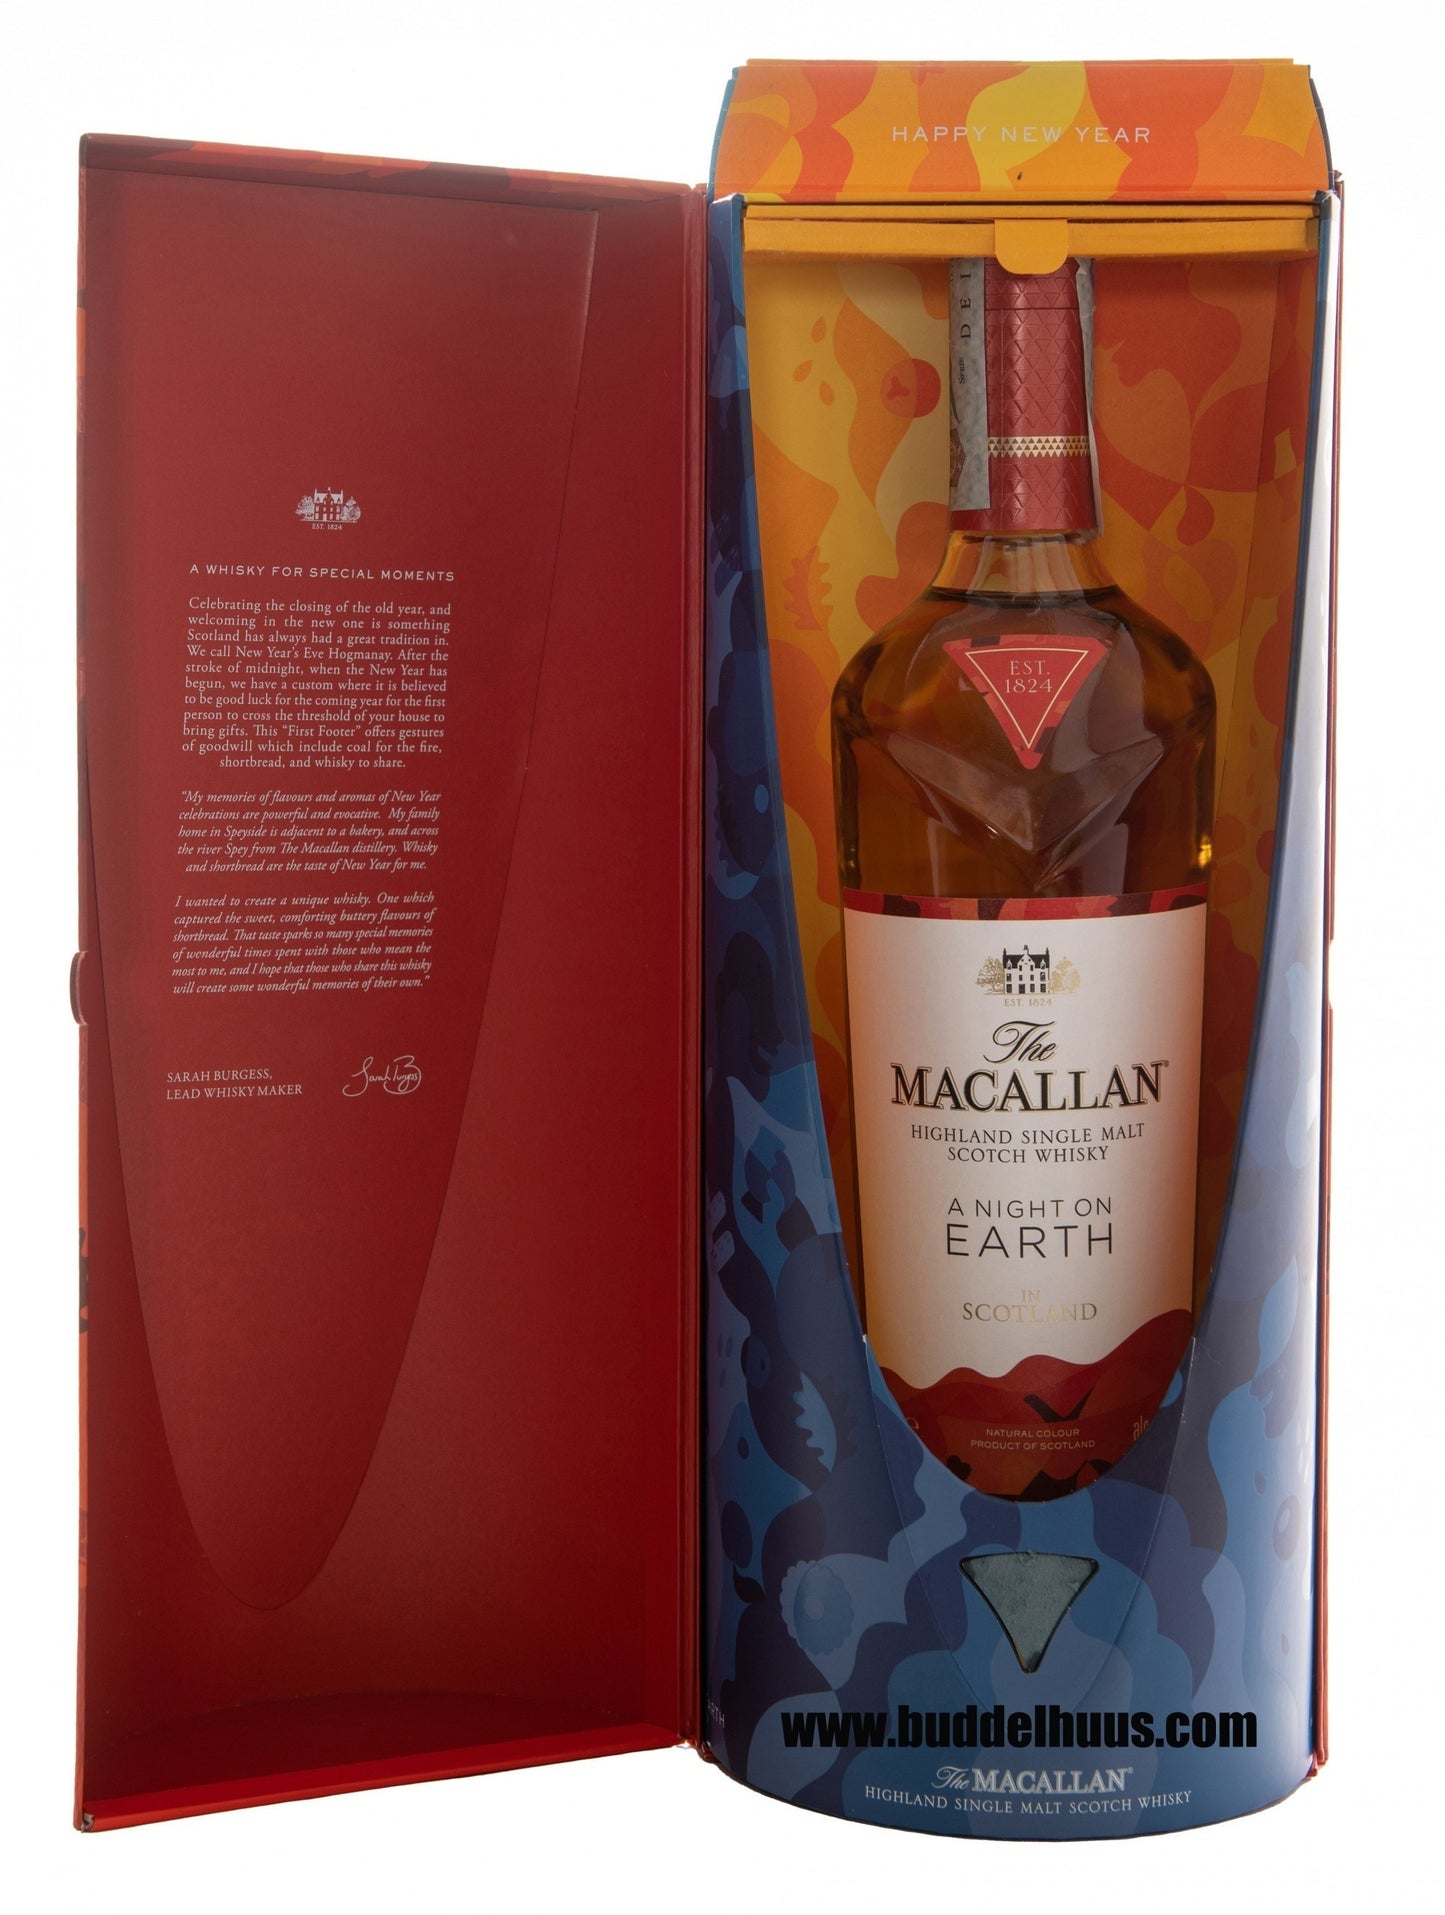 The MacAllan a Night on Earth by Erica Dorn